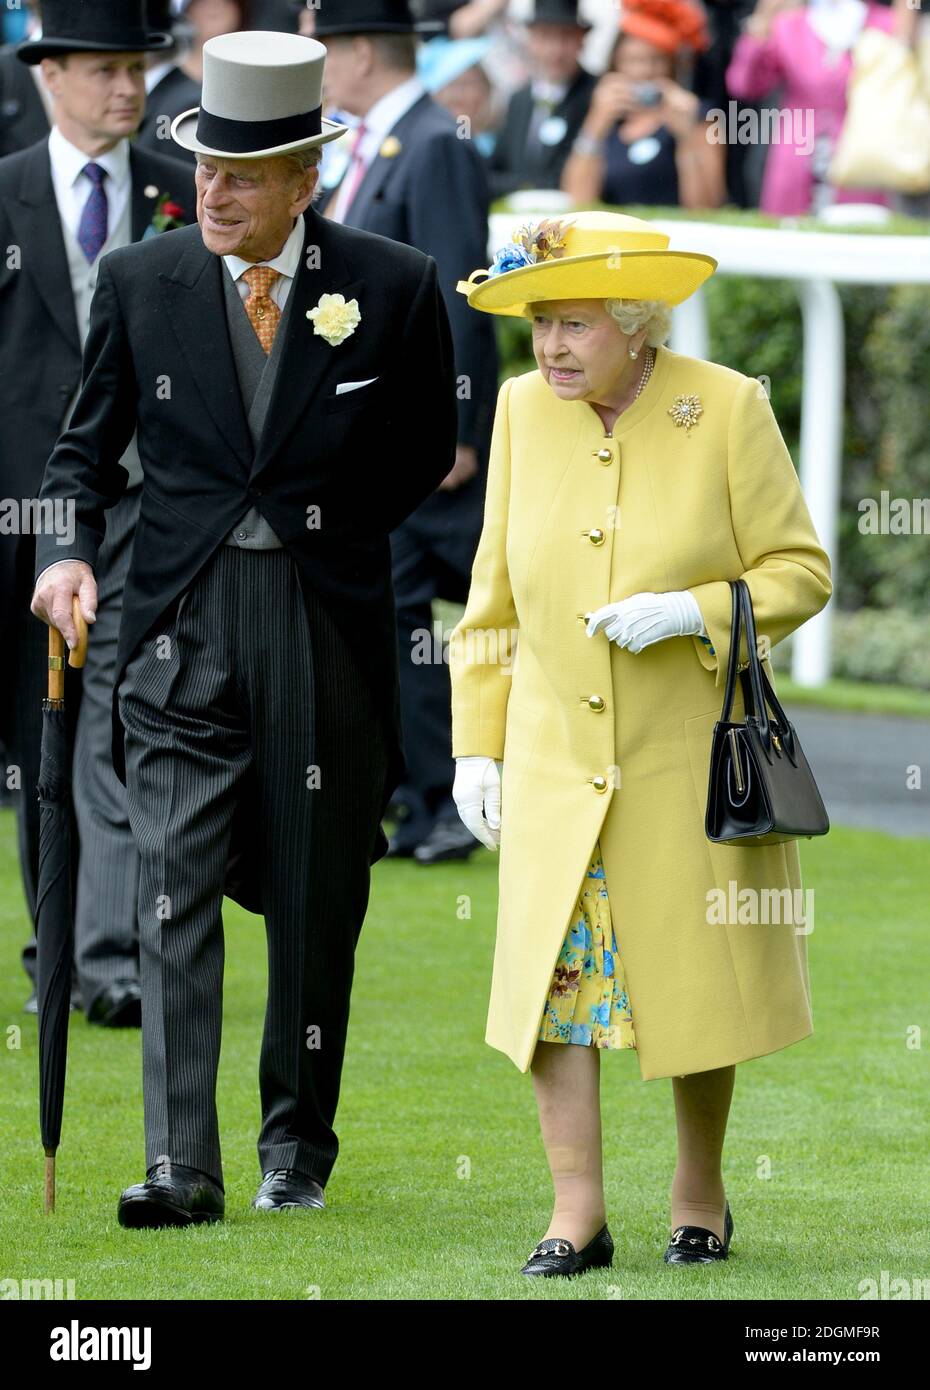 The Queen Elizabeth II and the Duke of Edinburgh arrive during day one of the 2016 Royal Ascot Meeting at Ascot Racecourse, Berkshire.   Stock Photo